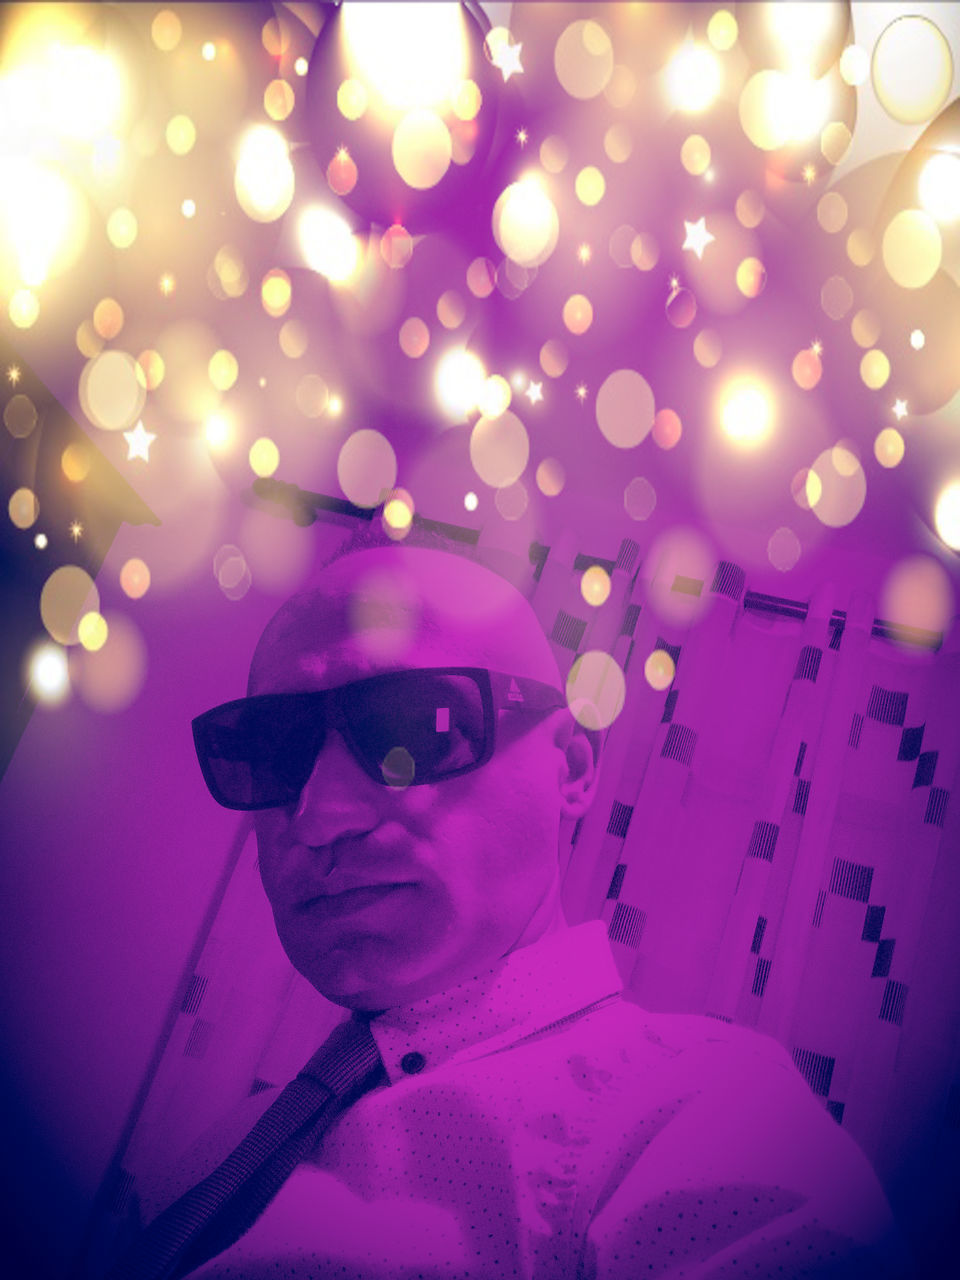 PORTRAIT OF YOUNG MAN WEARING SUNGLASSES AGAINST ILLUMINATED LIGHT